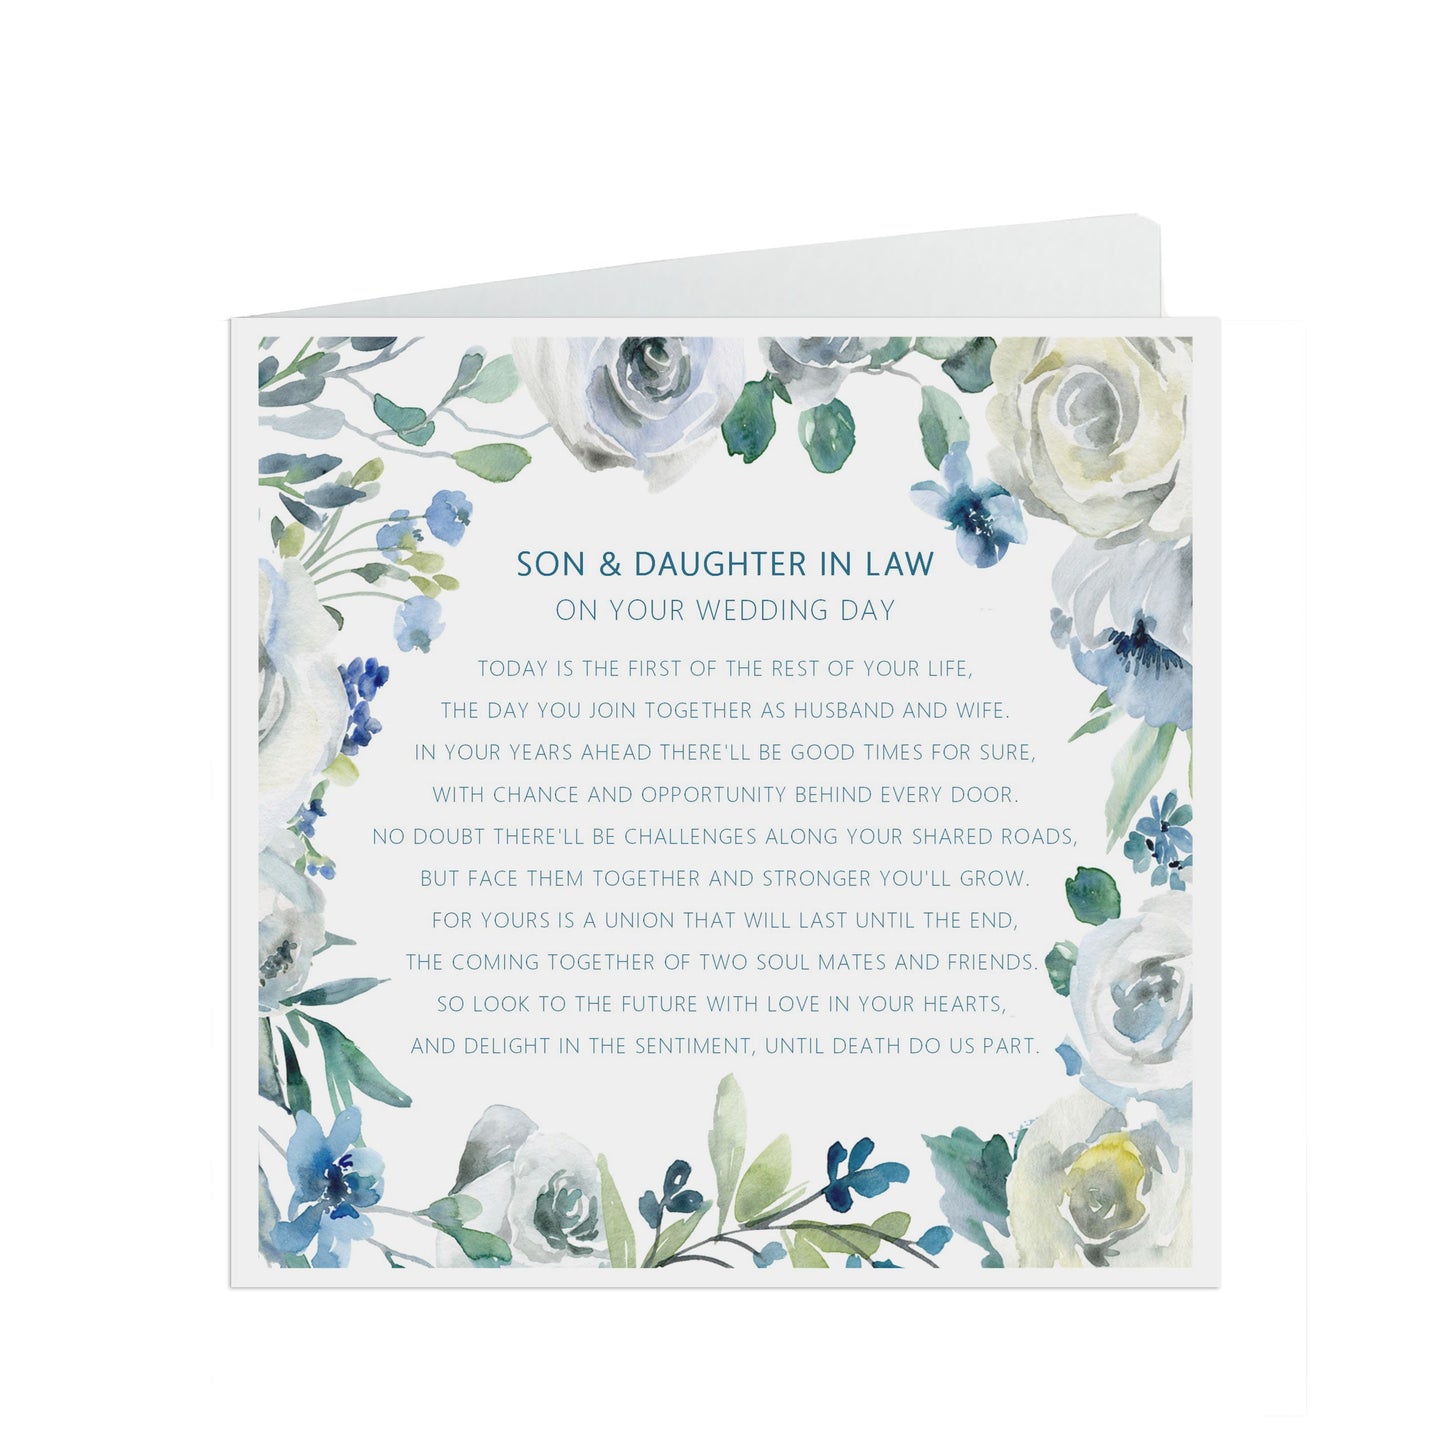 Son & Daughter In Law On Your Wedding Day Card - Blue Floral